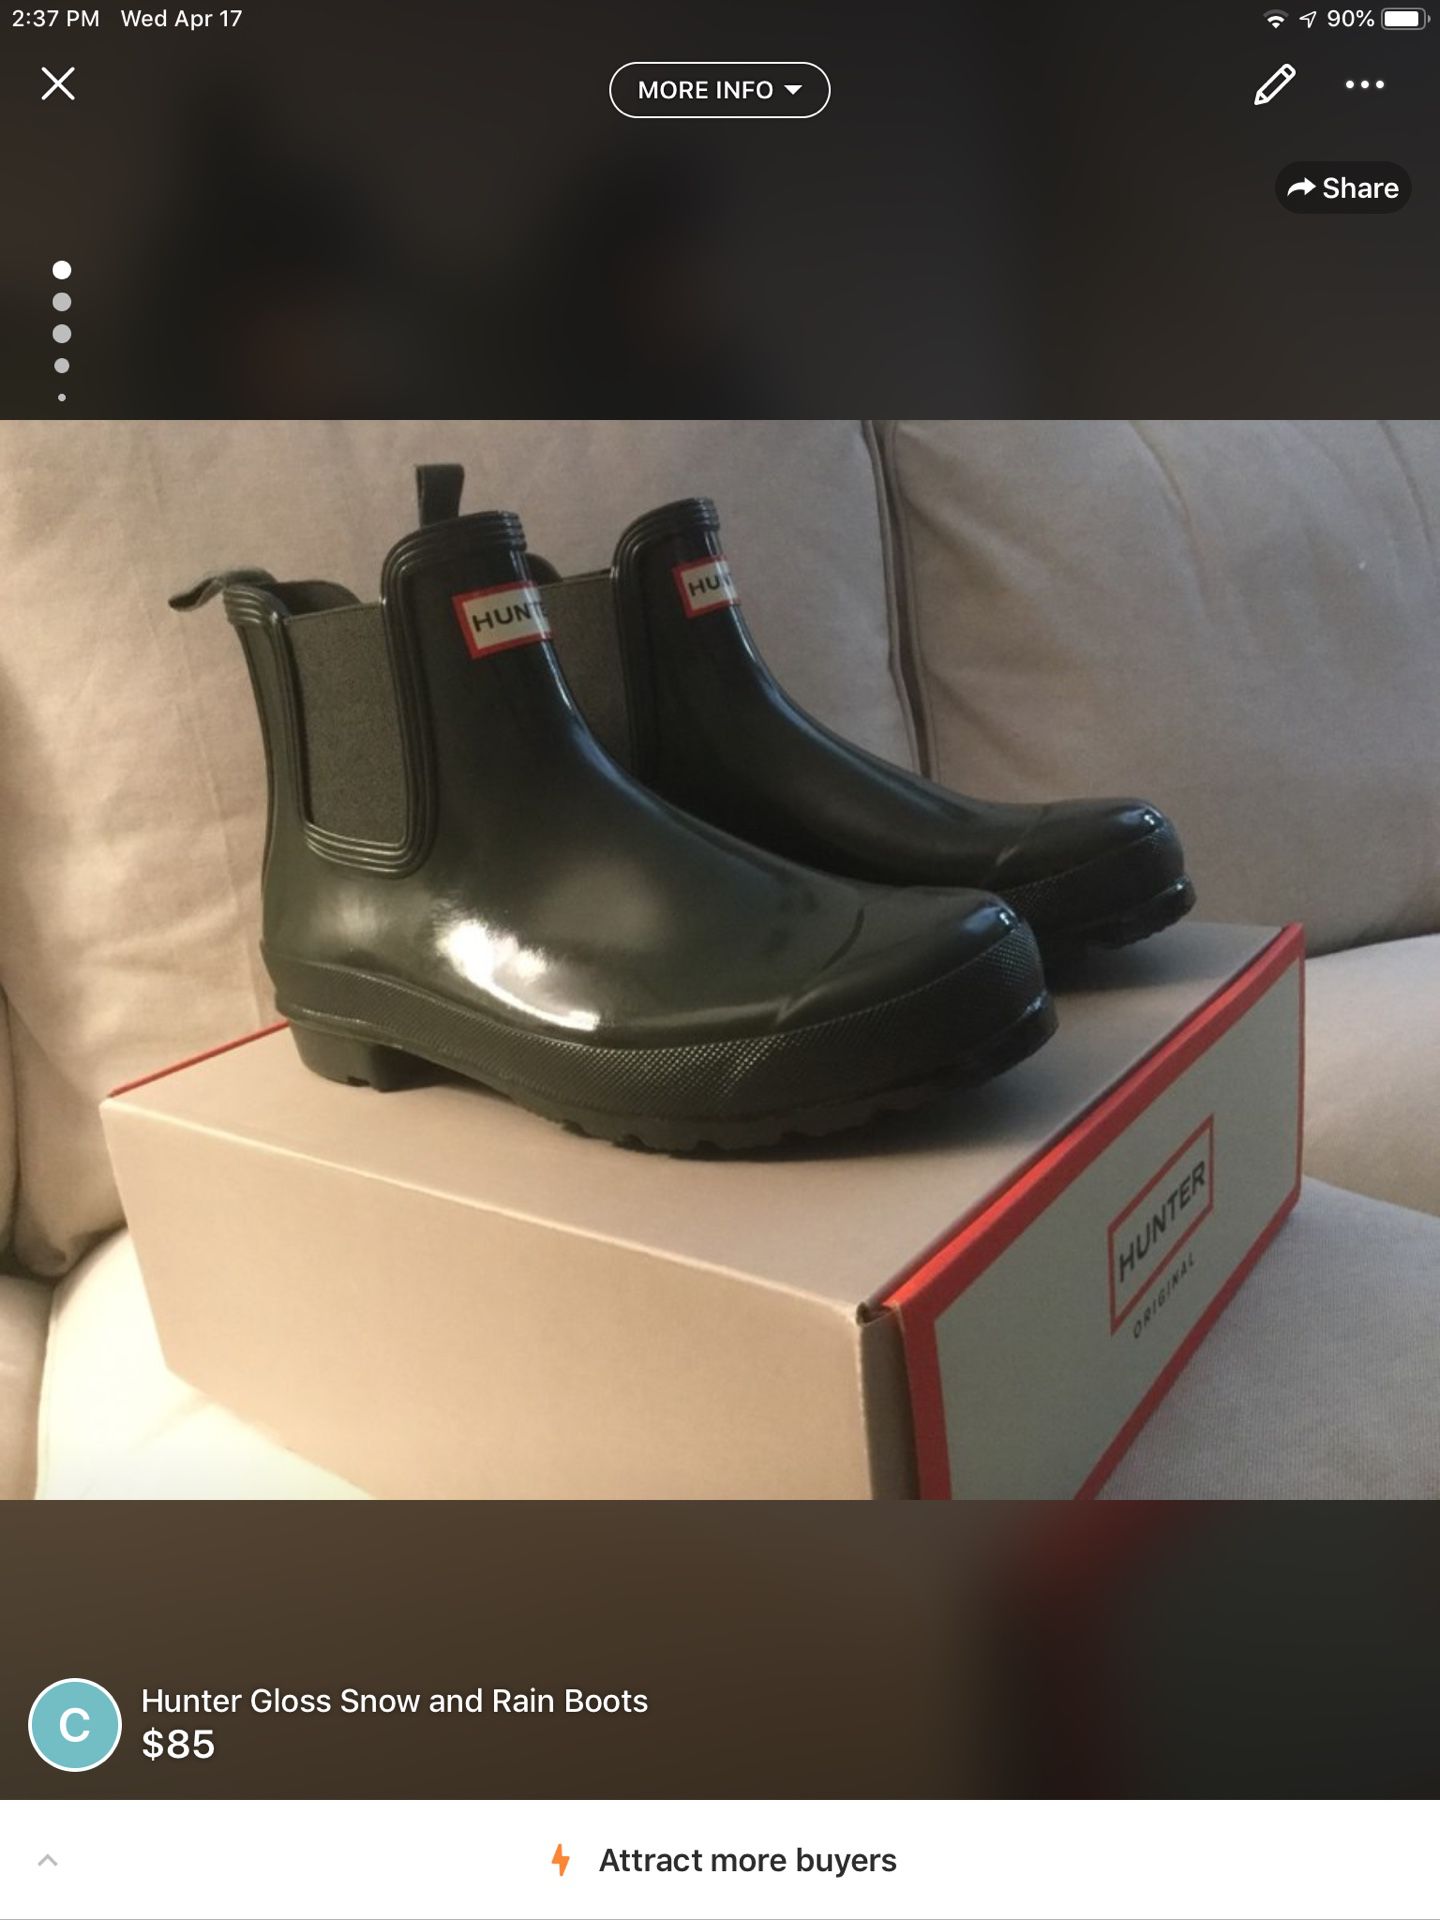 NEW Hunter Women’s Gloss Snow and Rain Boots - excellent opportunity!